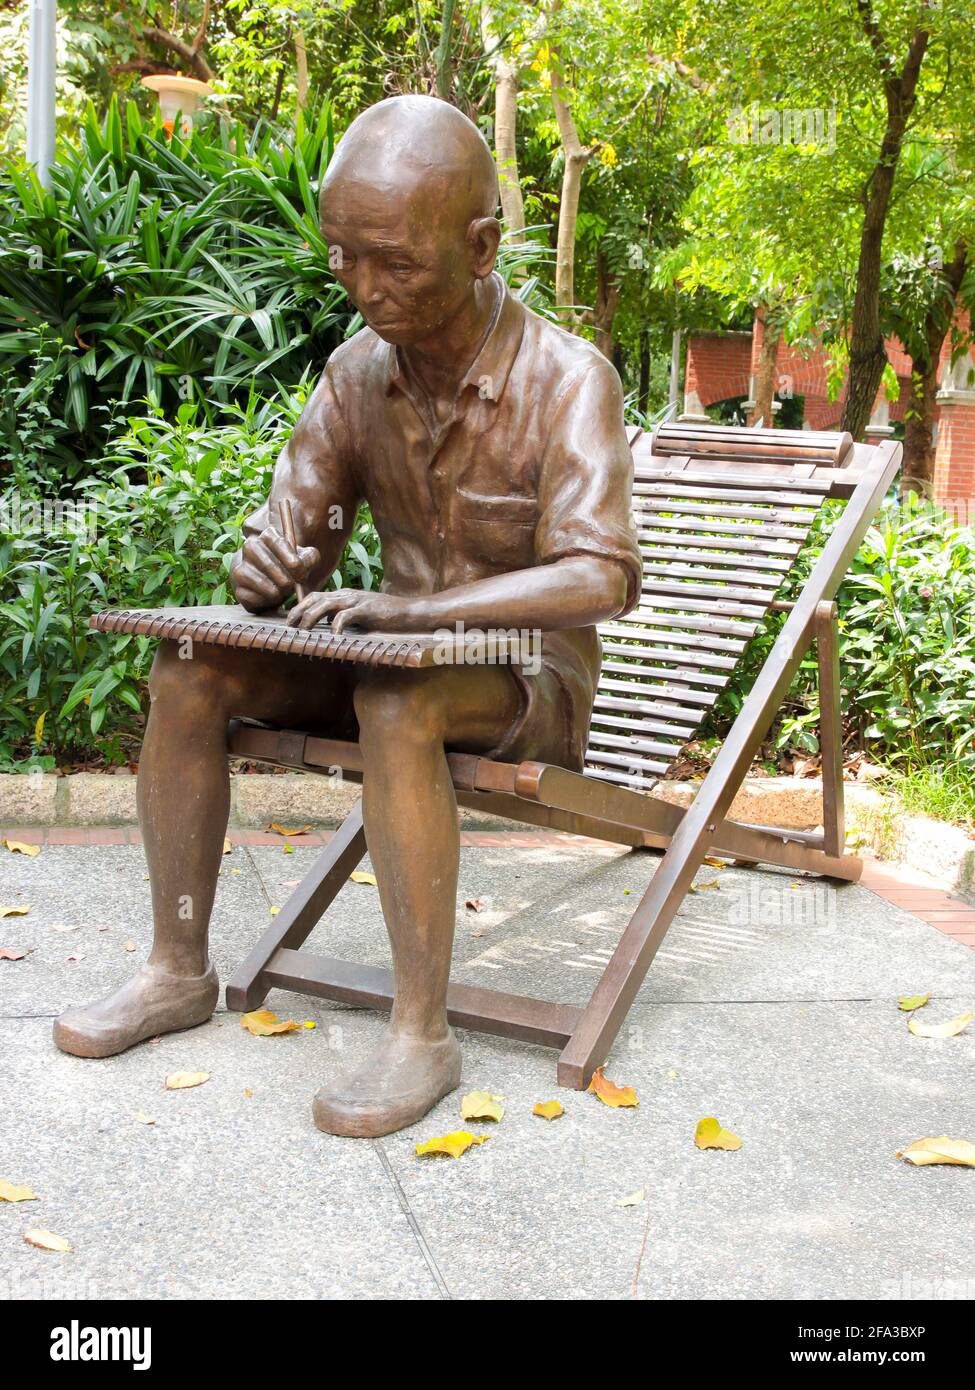 A nice bronze sculpture of a peasant old man sitting on a folding chair, drawing on a pad. In Taipei, Taiwan. Stock Photo